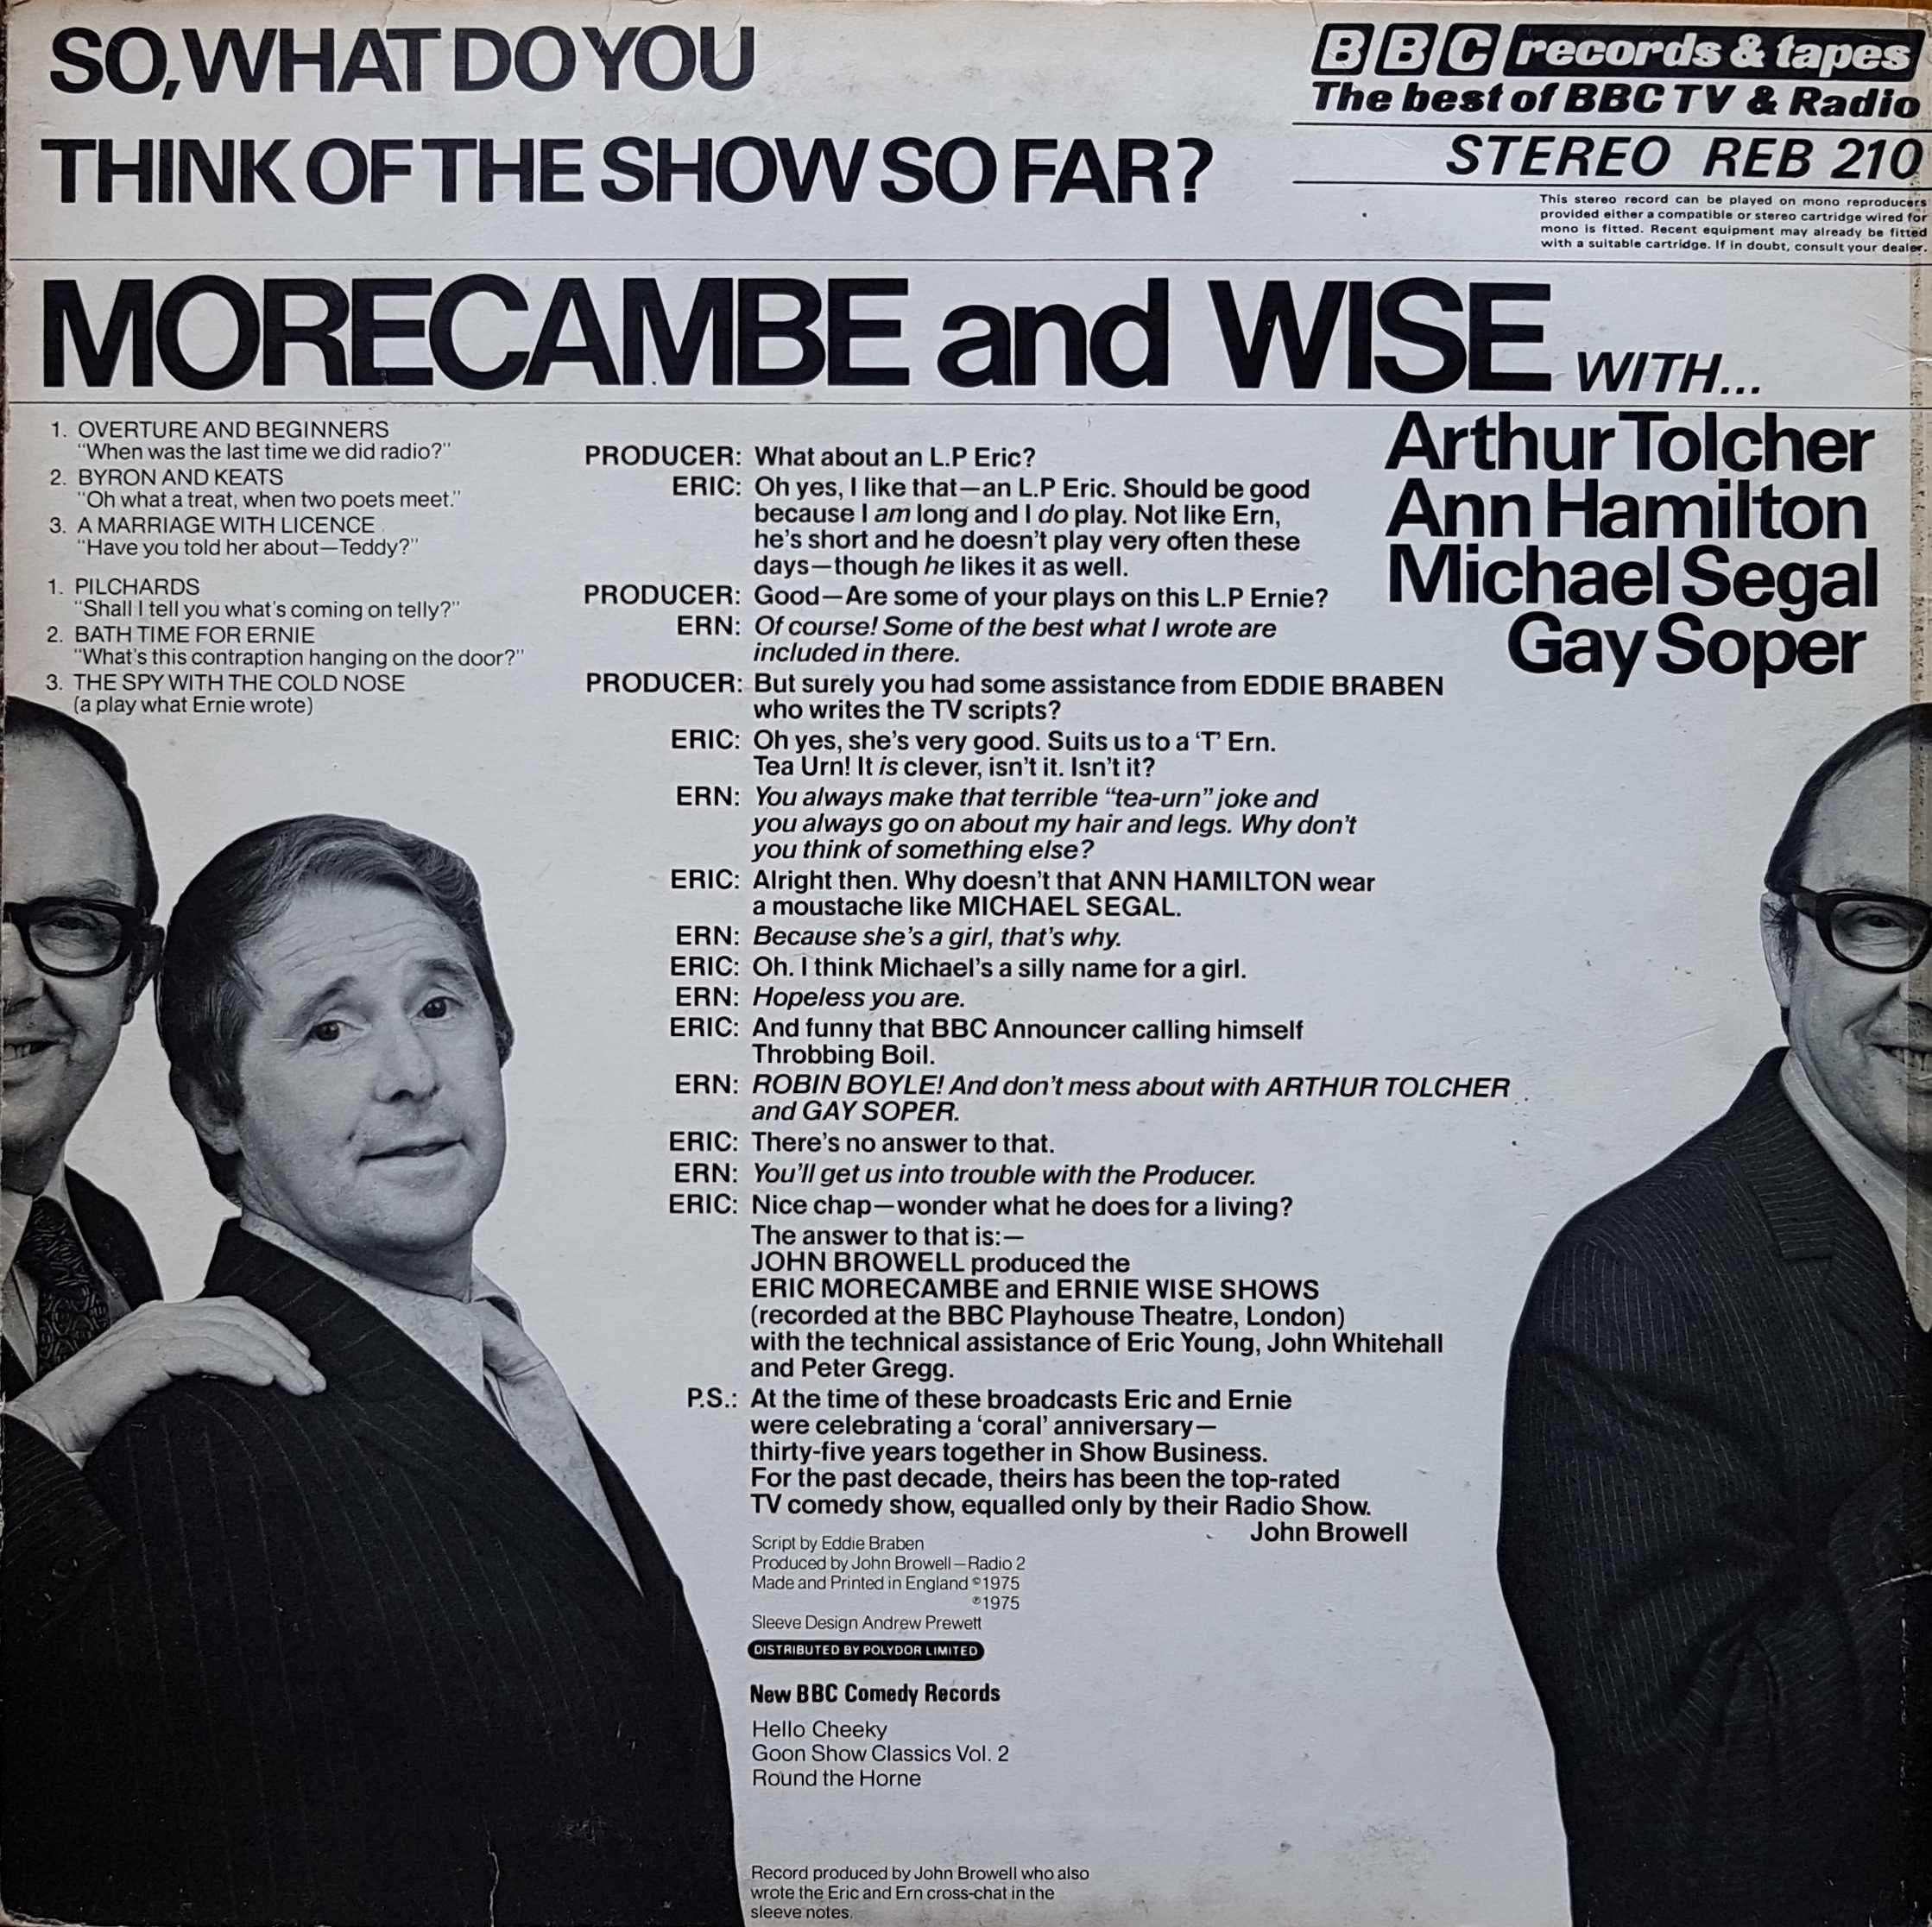 Picture of REB 210 So, what do you think of the show so far ? - Morecambe and Wise by artist Morecambe / Wise from the BBC records and Tapes library